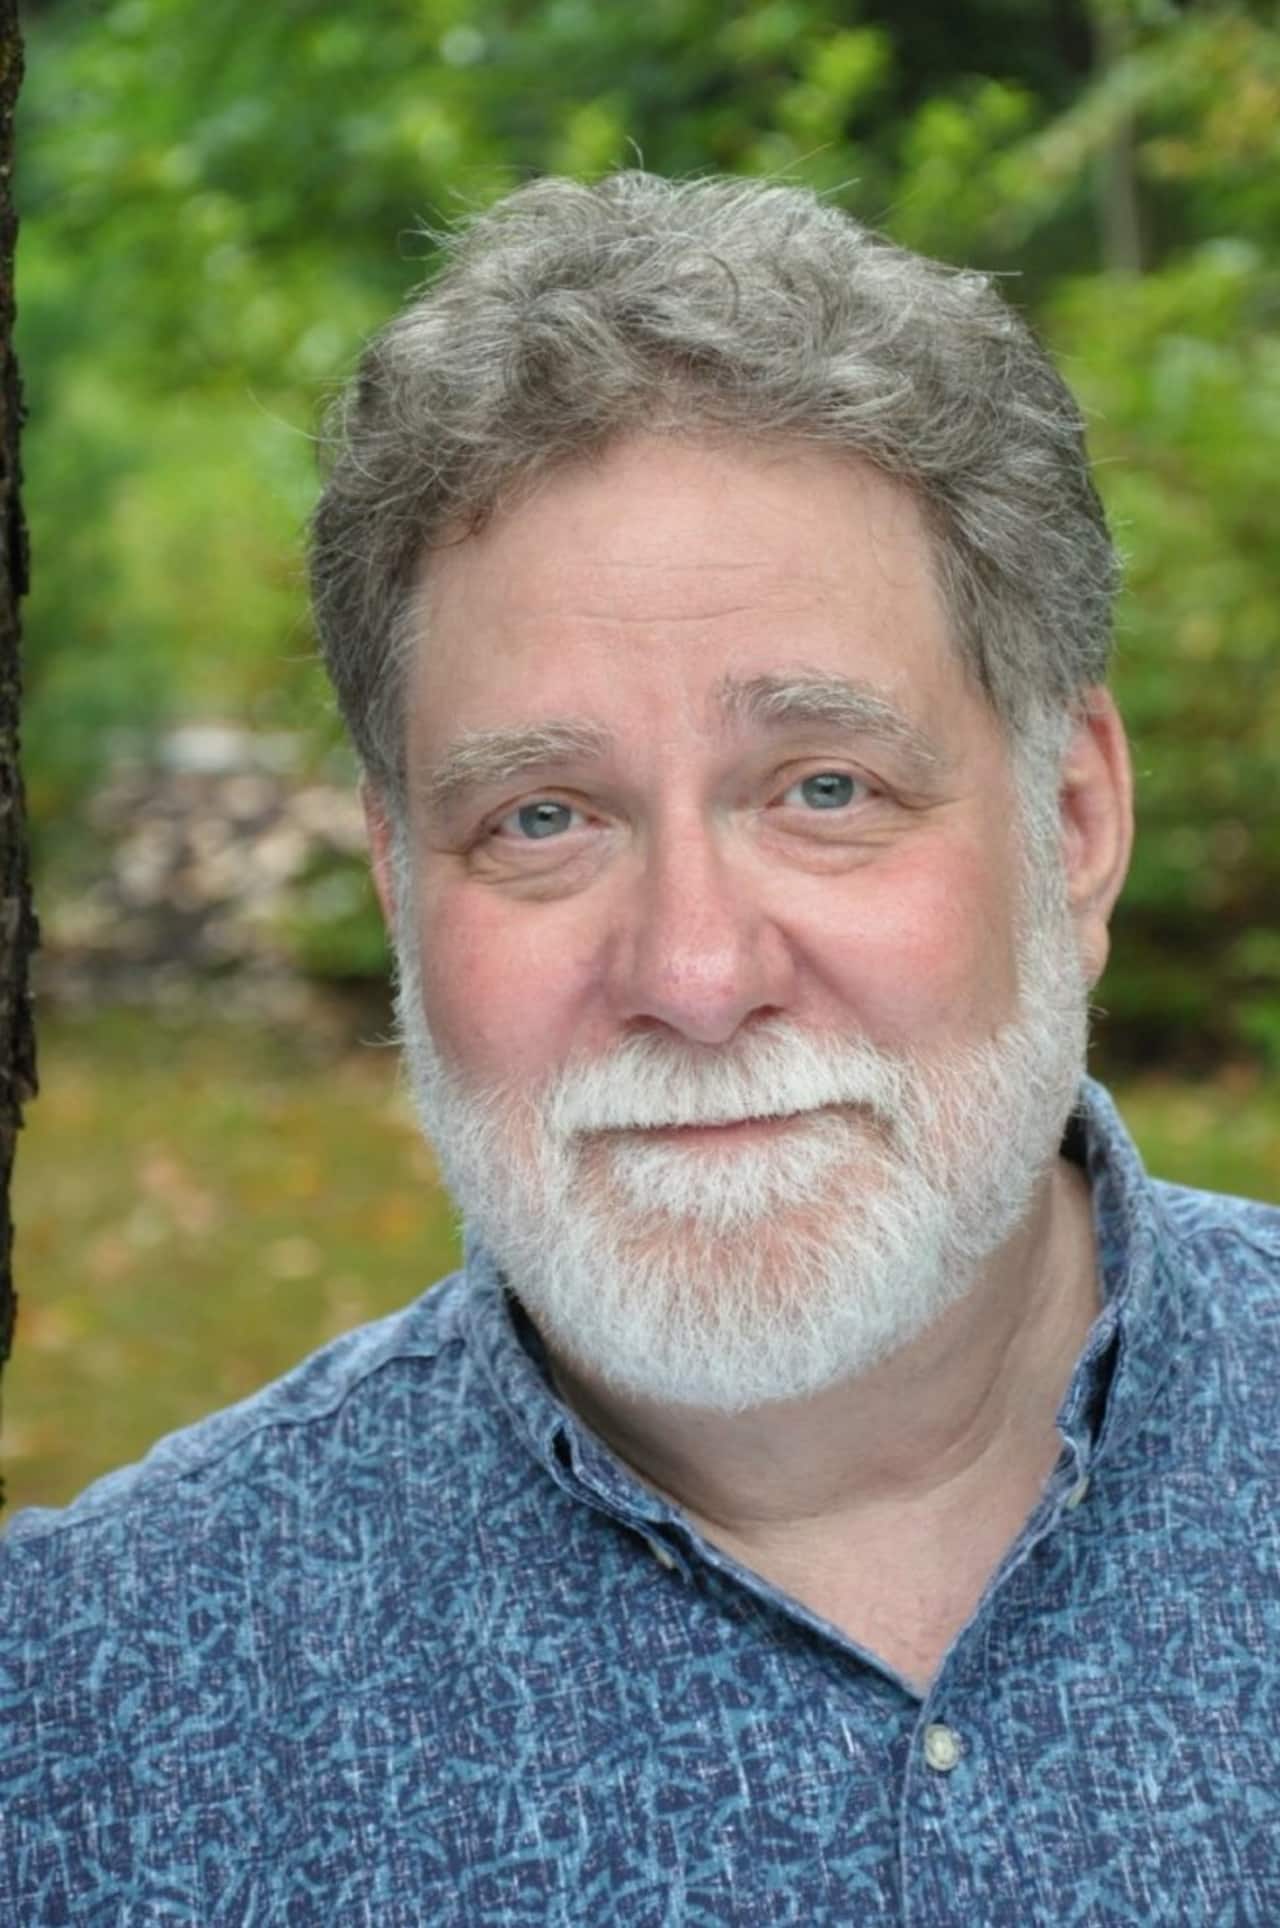 Actor Richard Masur currently serves as chair of the Croton Democrats.